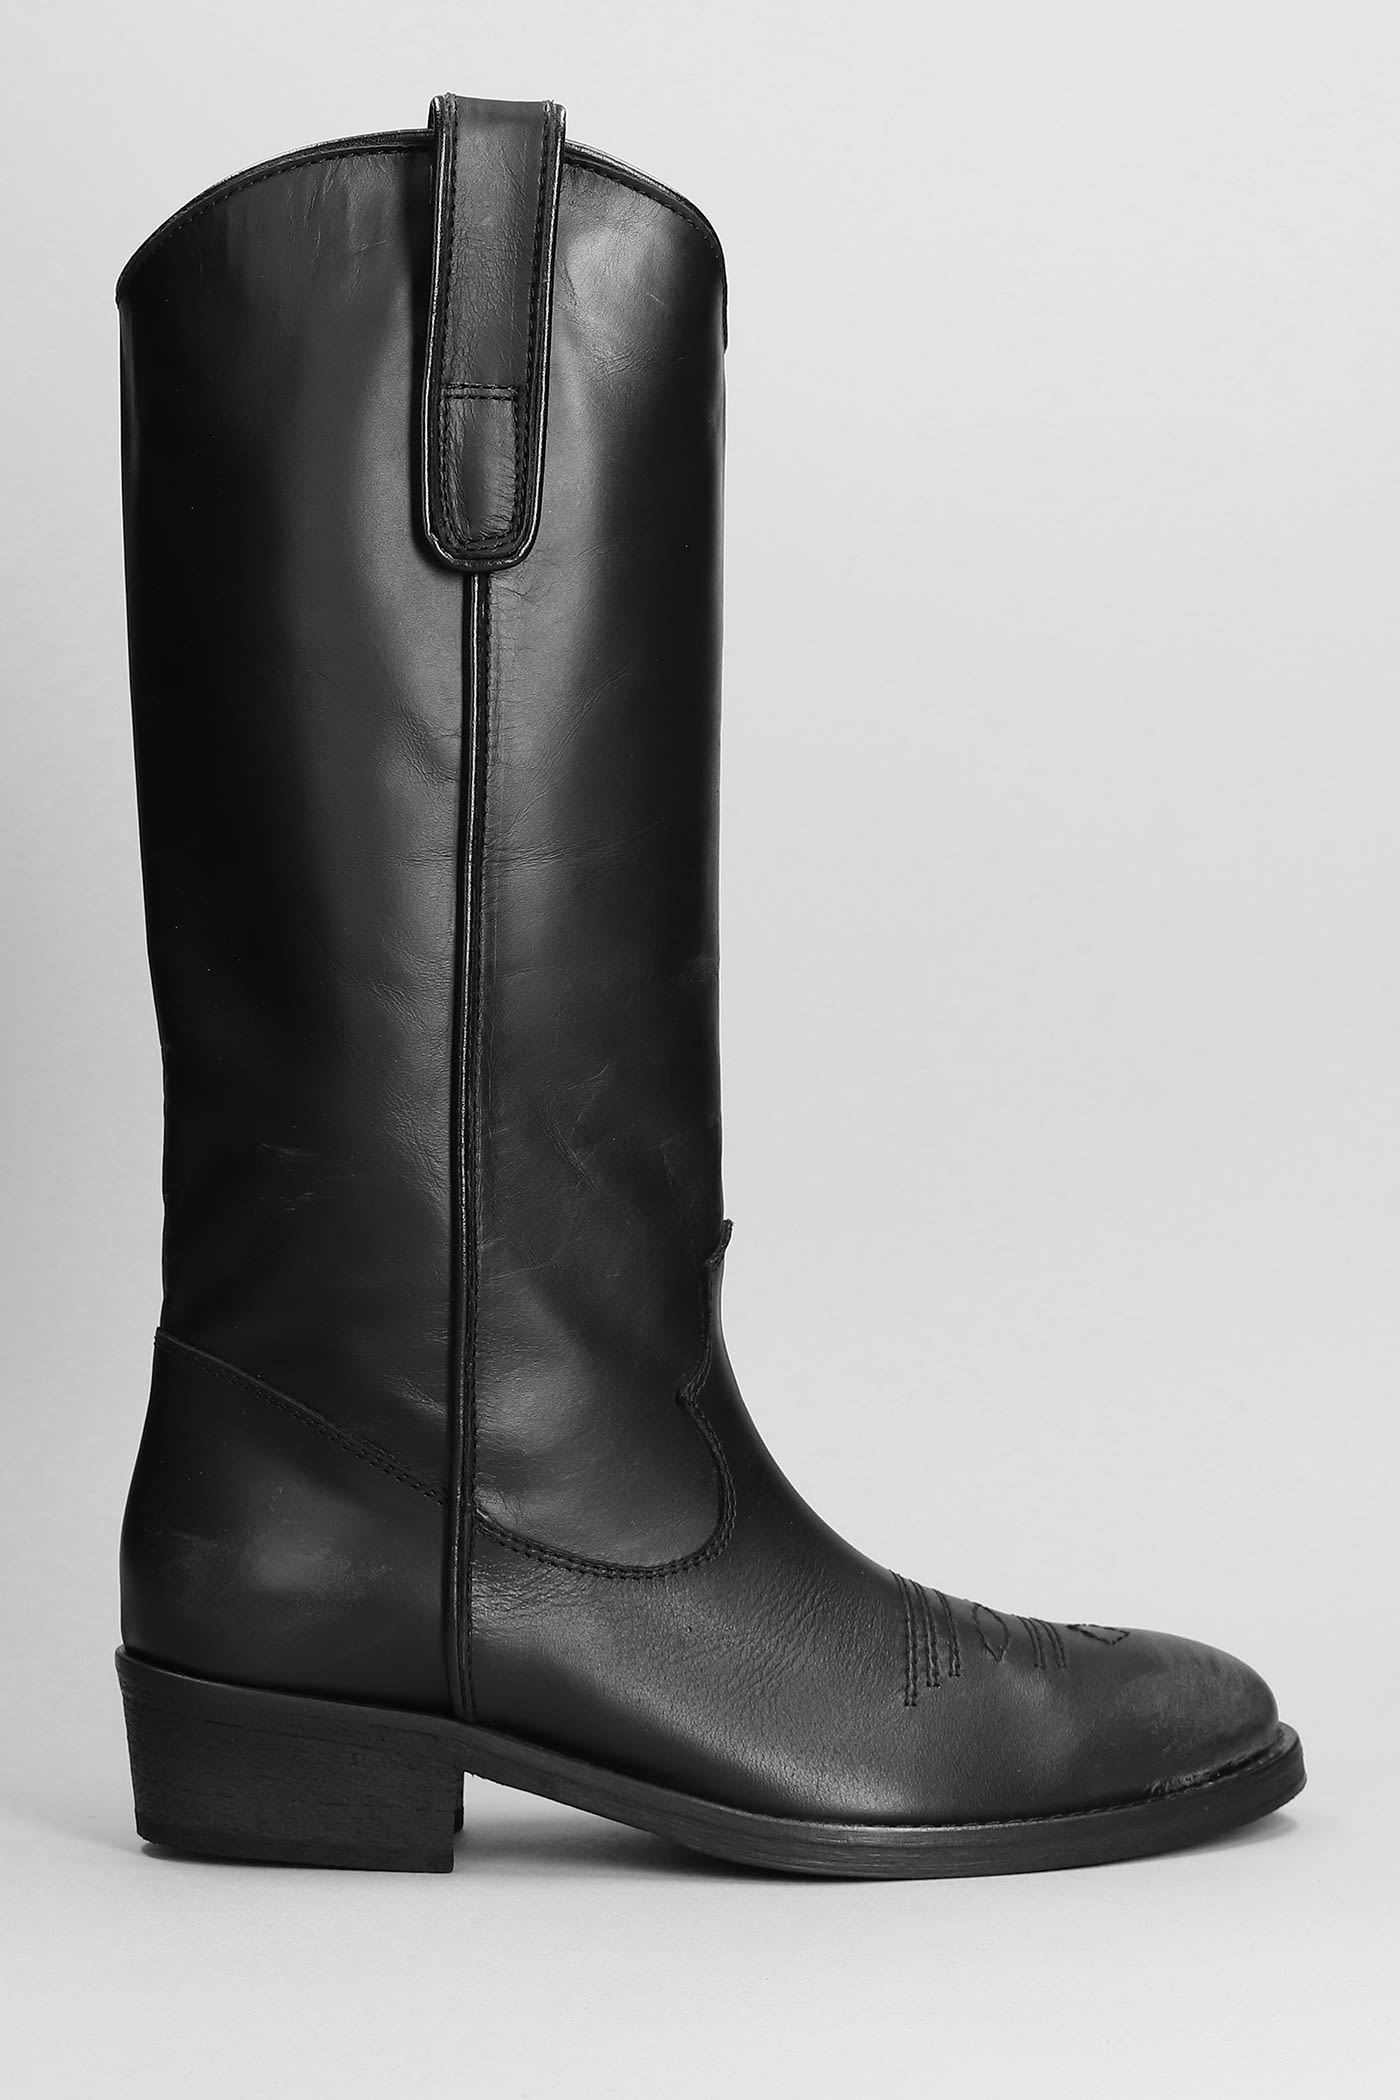 VIA ROMA 15 TEXAN BOOTS IN BLACK LEATHER